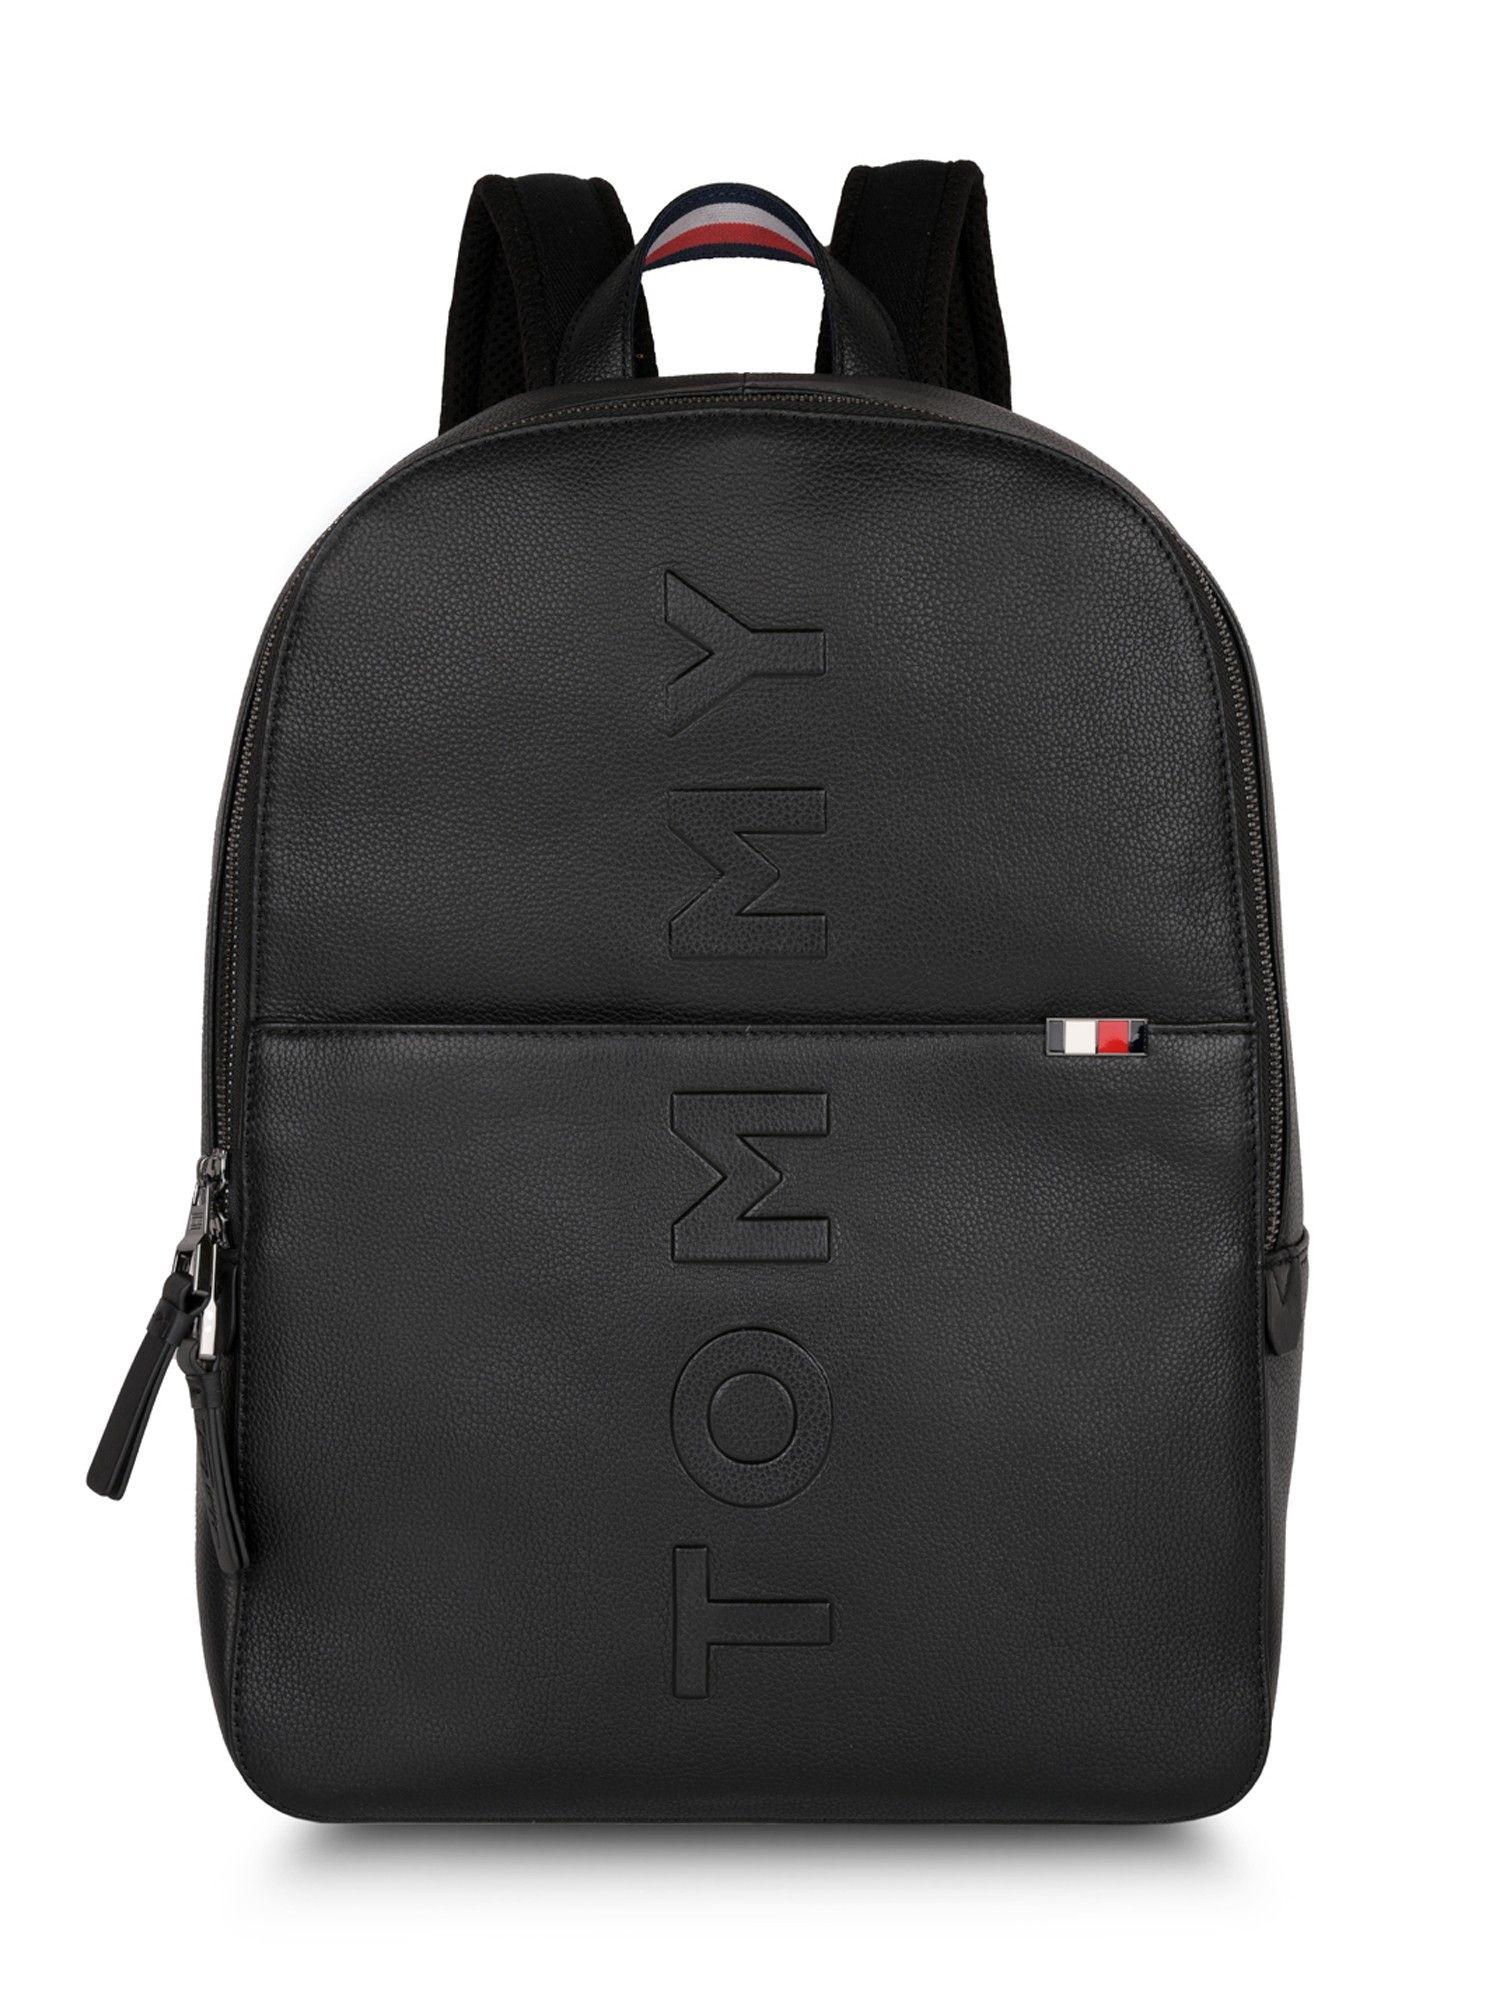 time-square-laptop-backpack-textured-black-8903496176155